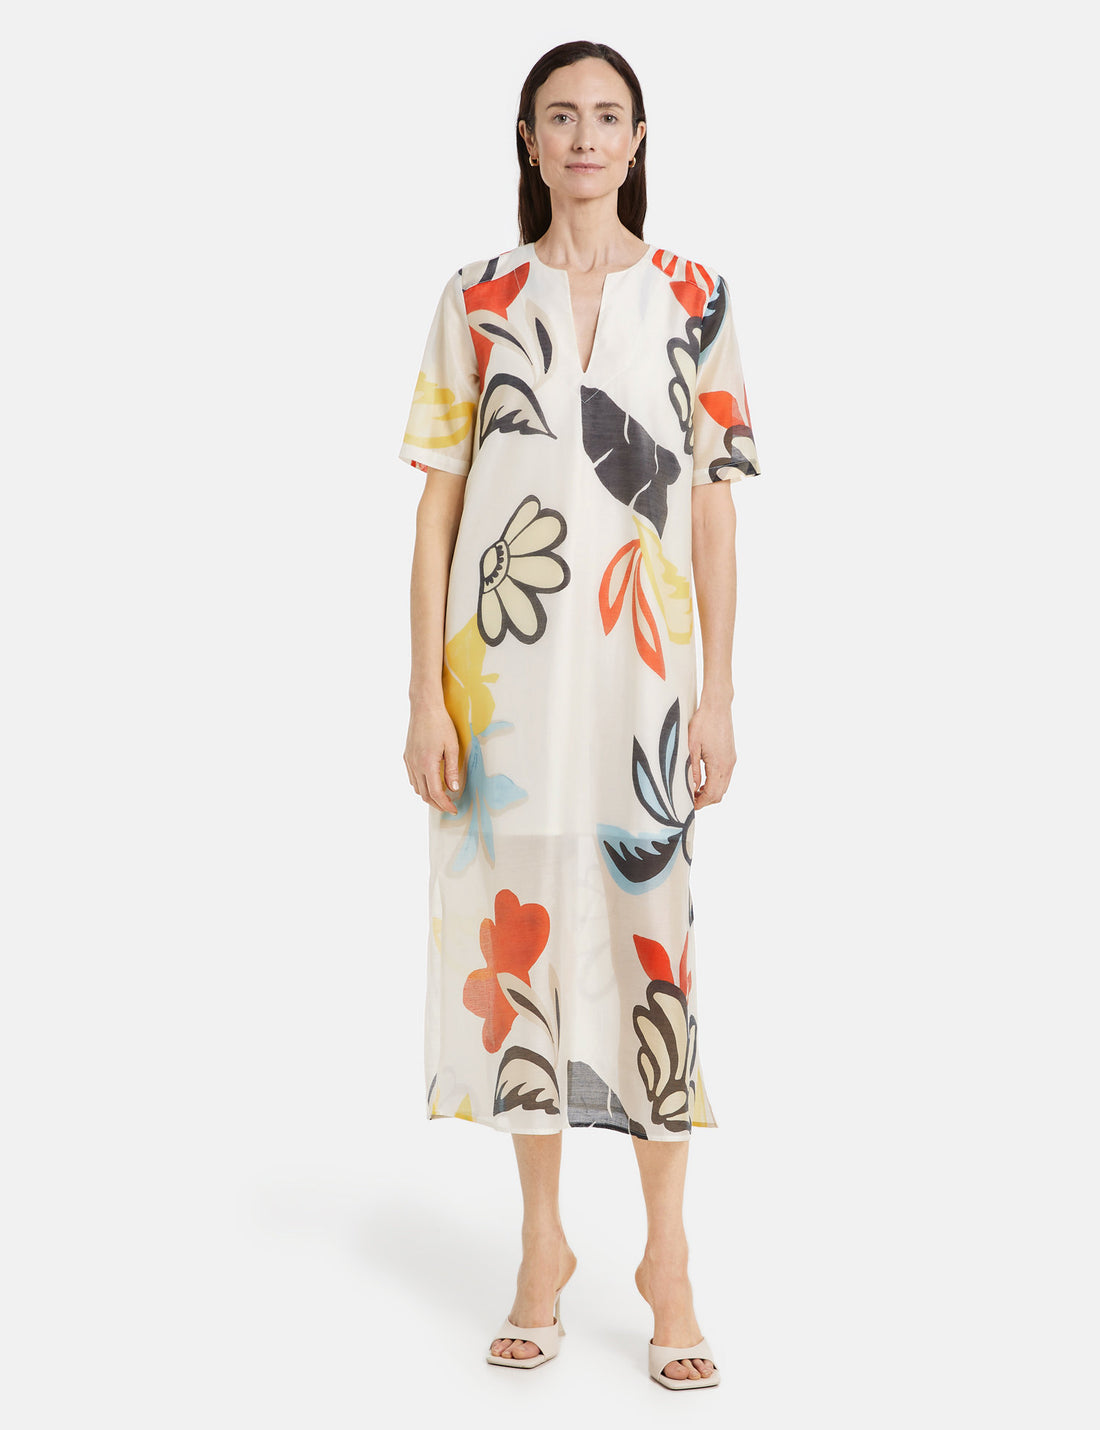 Flowing Midi Dress With A Floral Print_380074-31533_9048_01